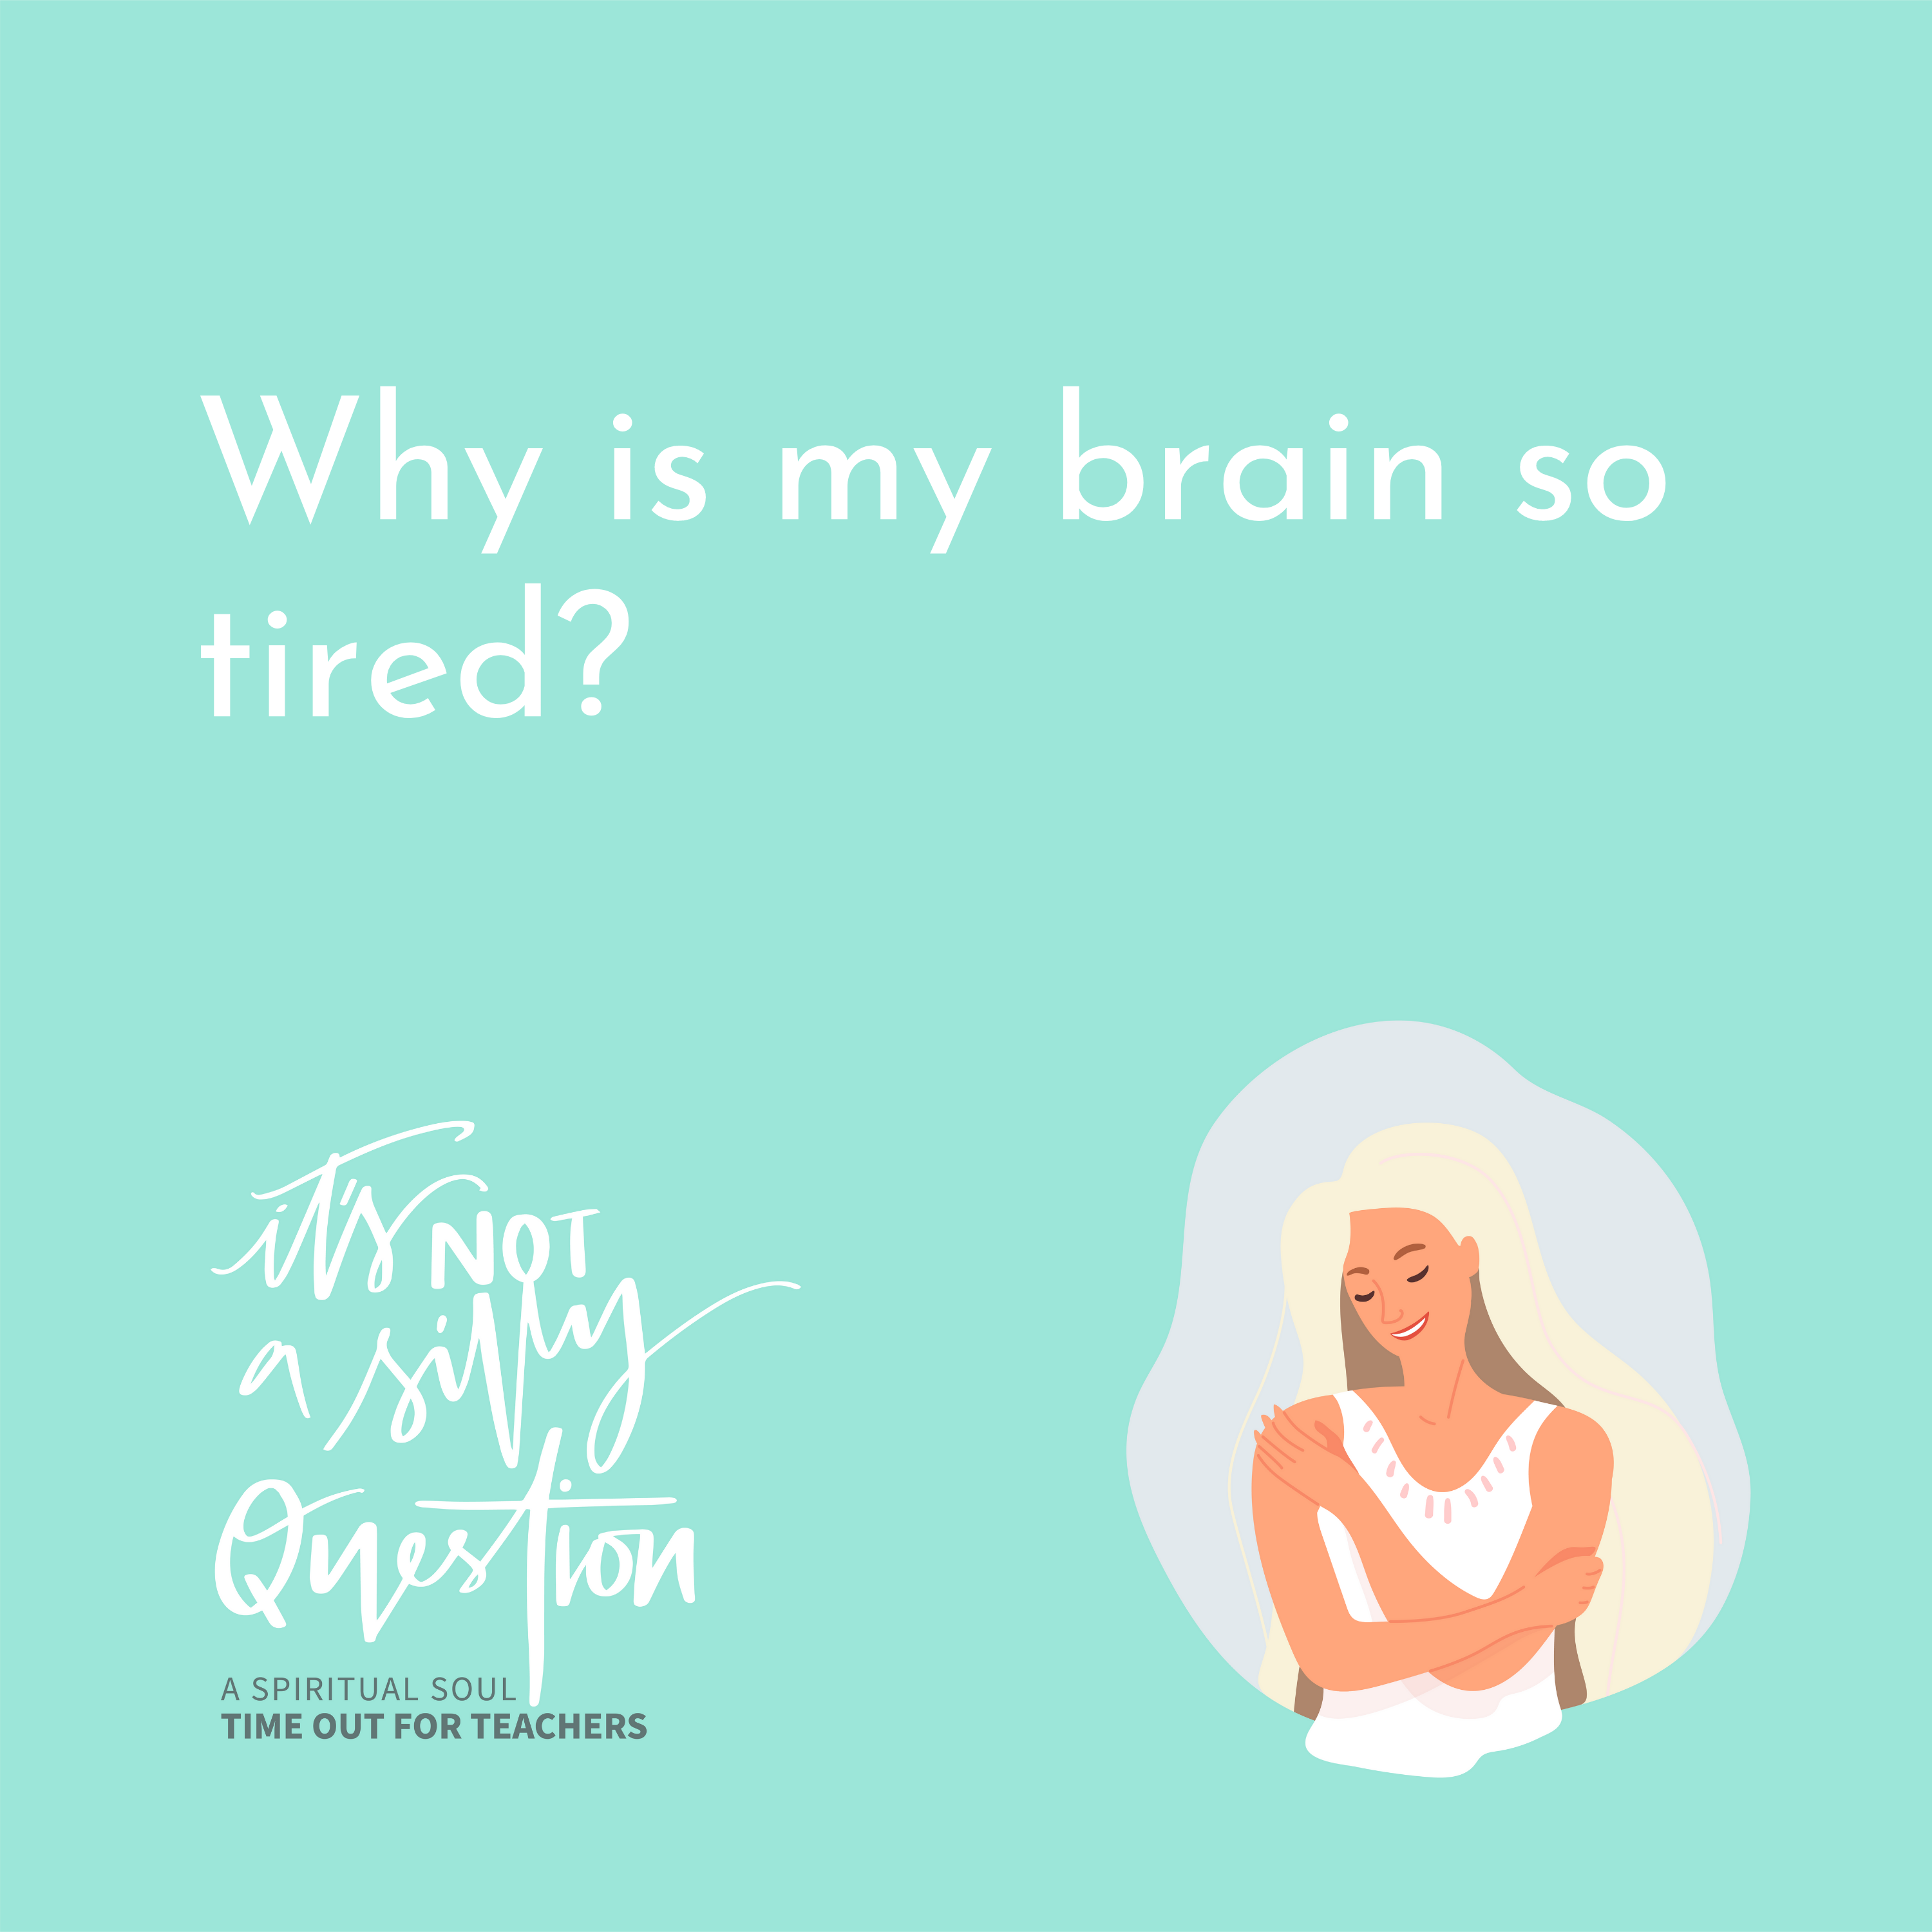 Why is my brain so tired?